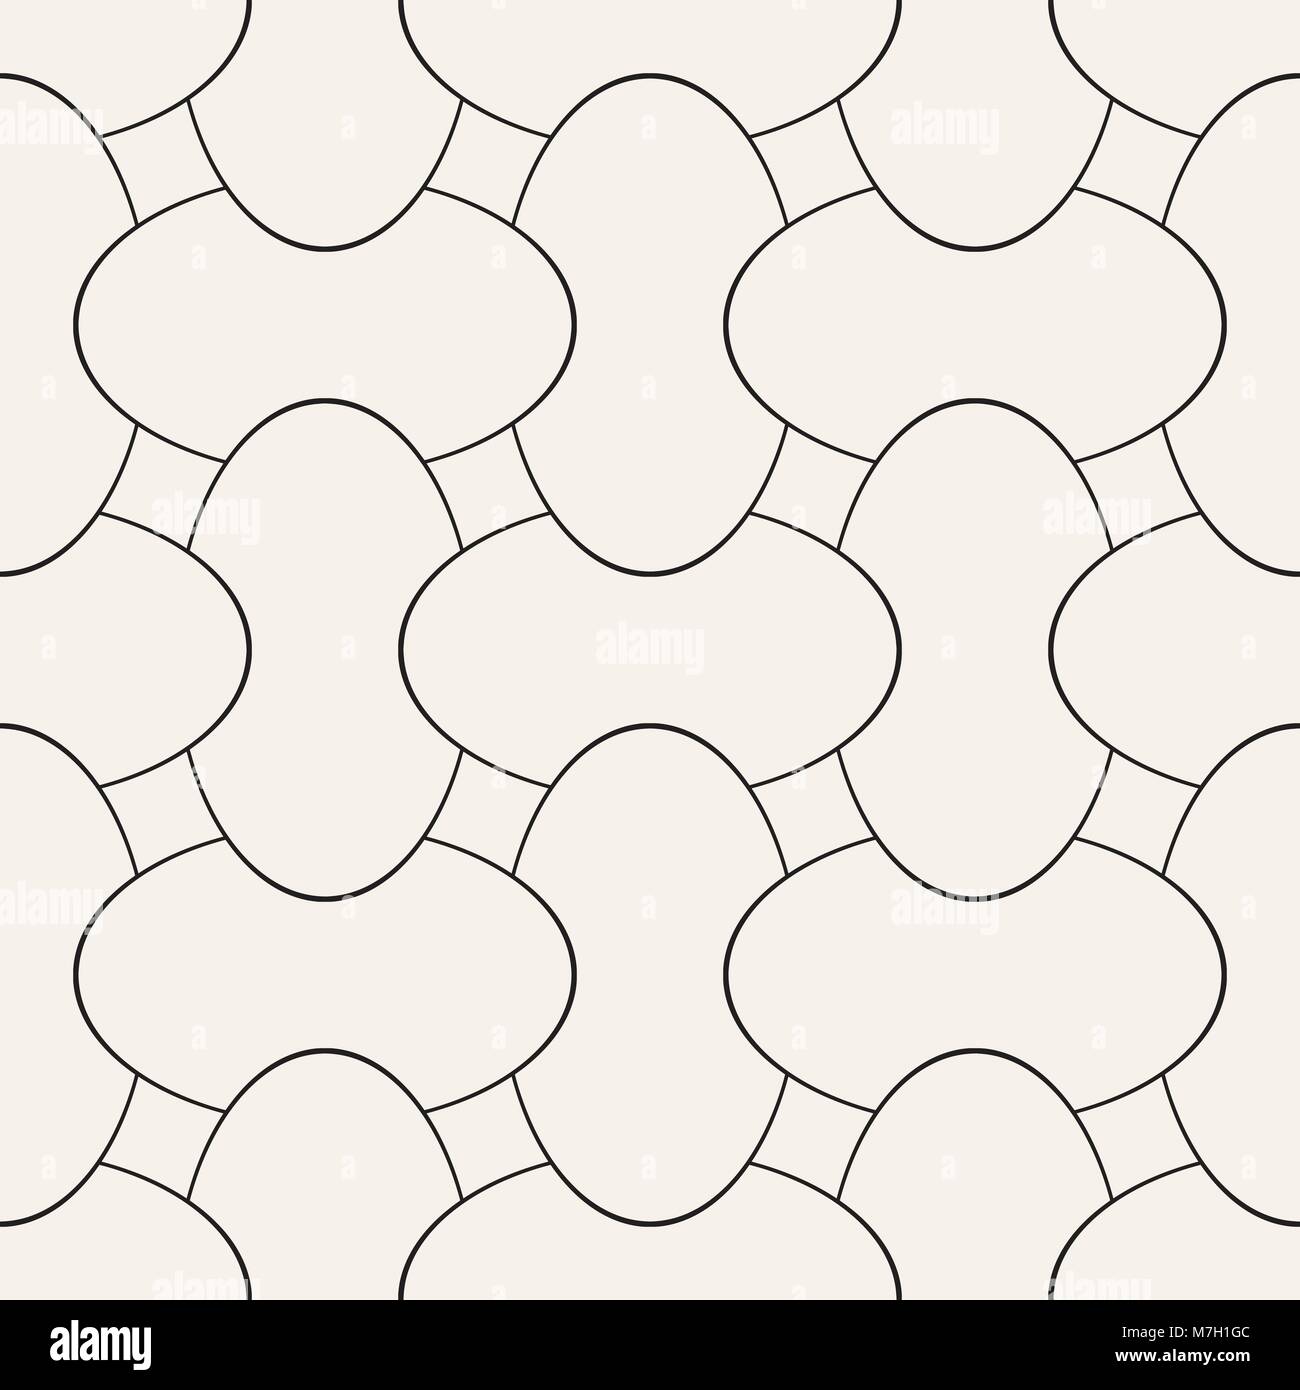 Vector geometric seamless pattern with curved shapes grid